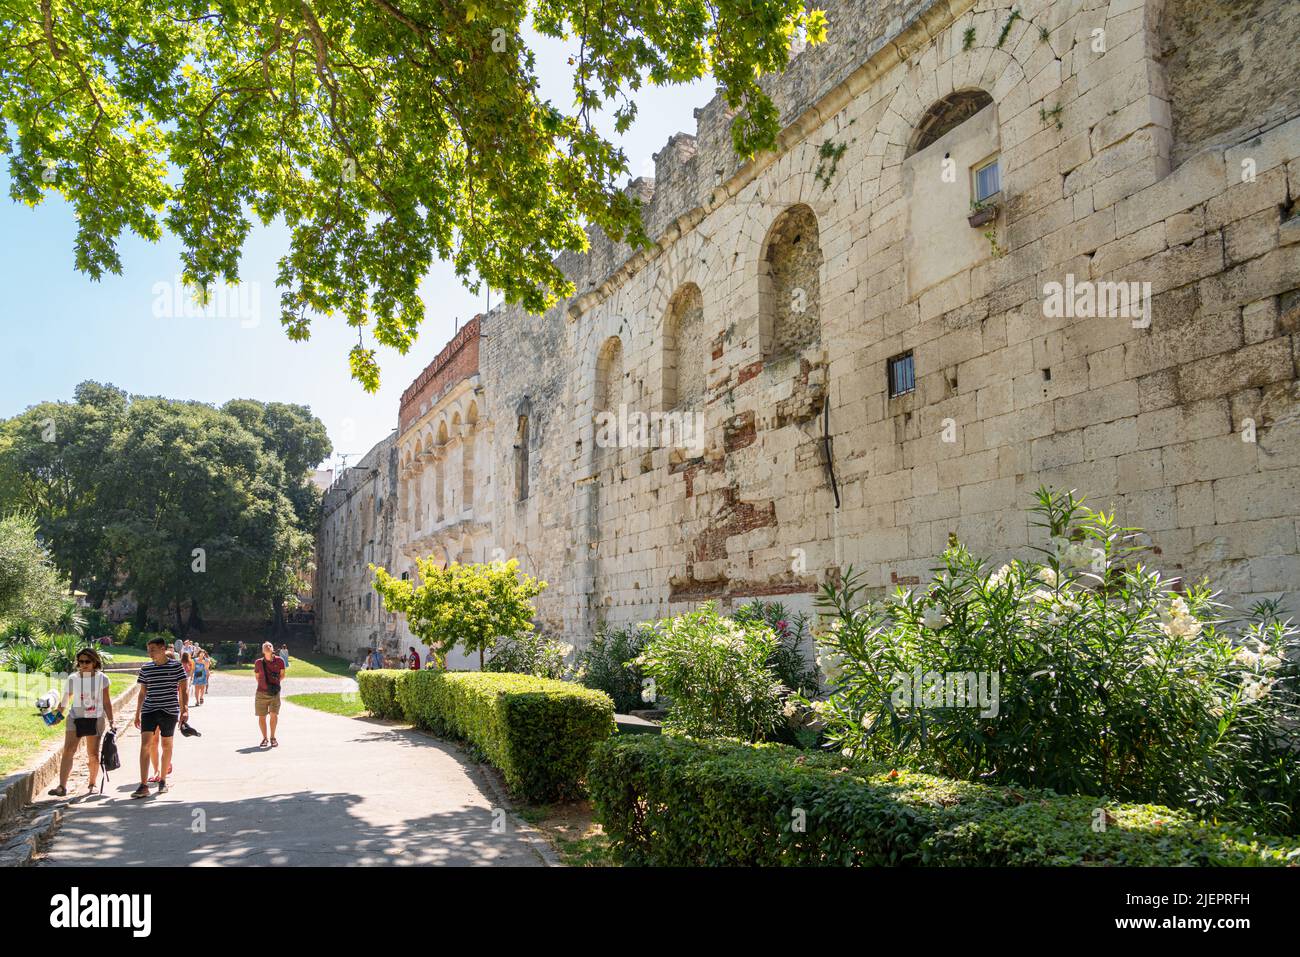 SPLIT, CROATIA - JULY 30, 2021: Golden Gate or the Northern Gate, is one of the four main Roman gates into the old town of Split and was built as part Stock Photo